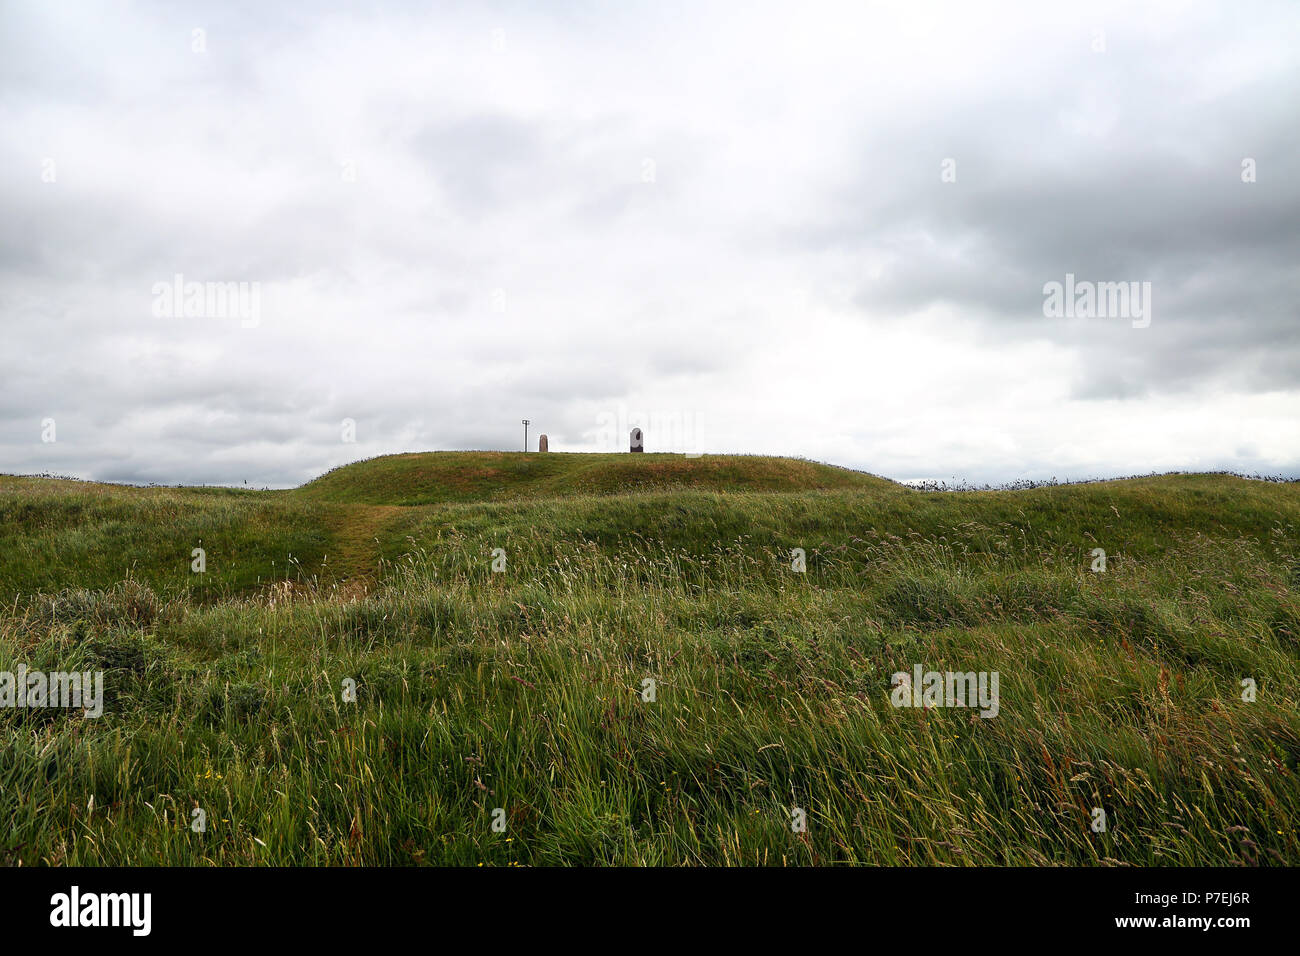 The Hill of Tara, located near the River Boyne, is an archaeological complex that runs between Navan and Dunshaughlin in County Meath, Ireland. It con Stock Photo